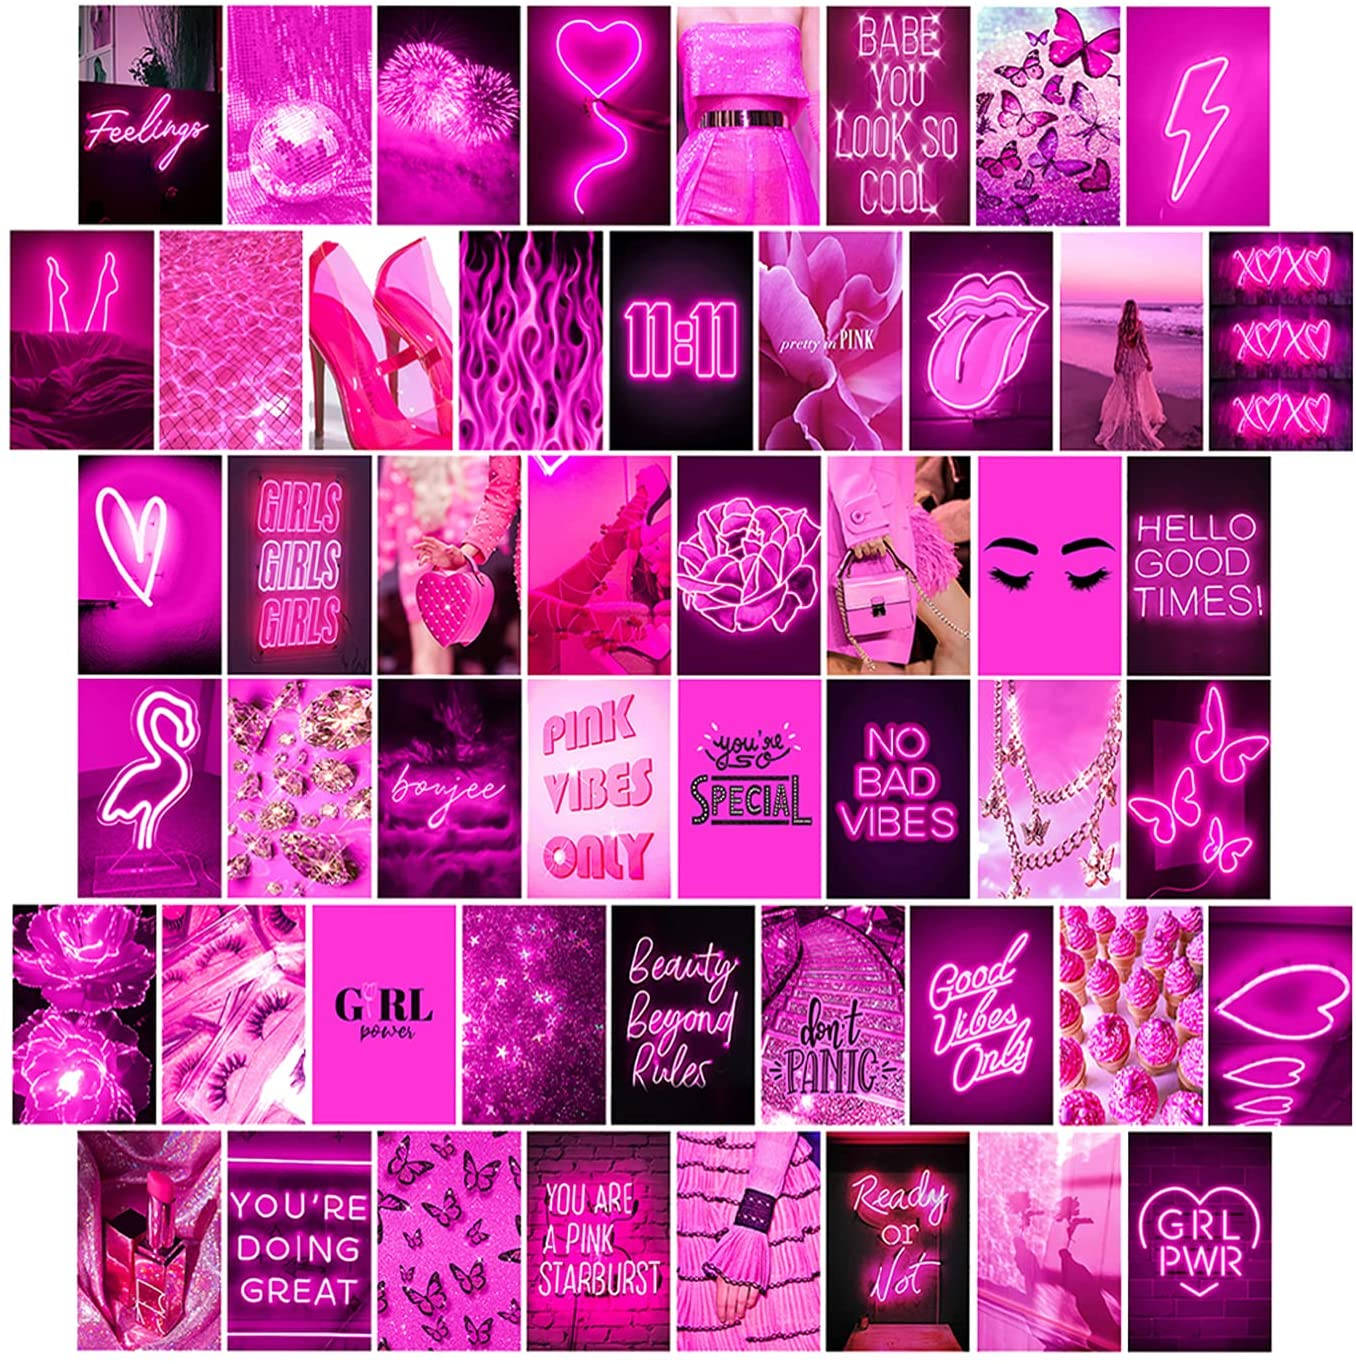 Download Neon Pink Collage In White Background Wallpaper | Wallpapers.com